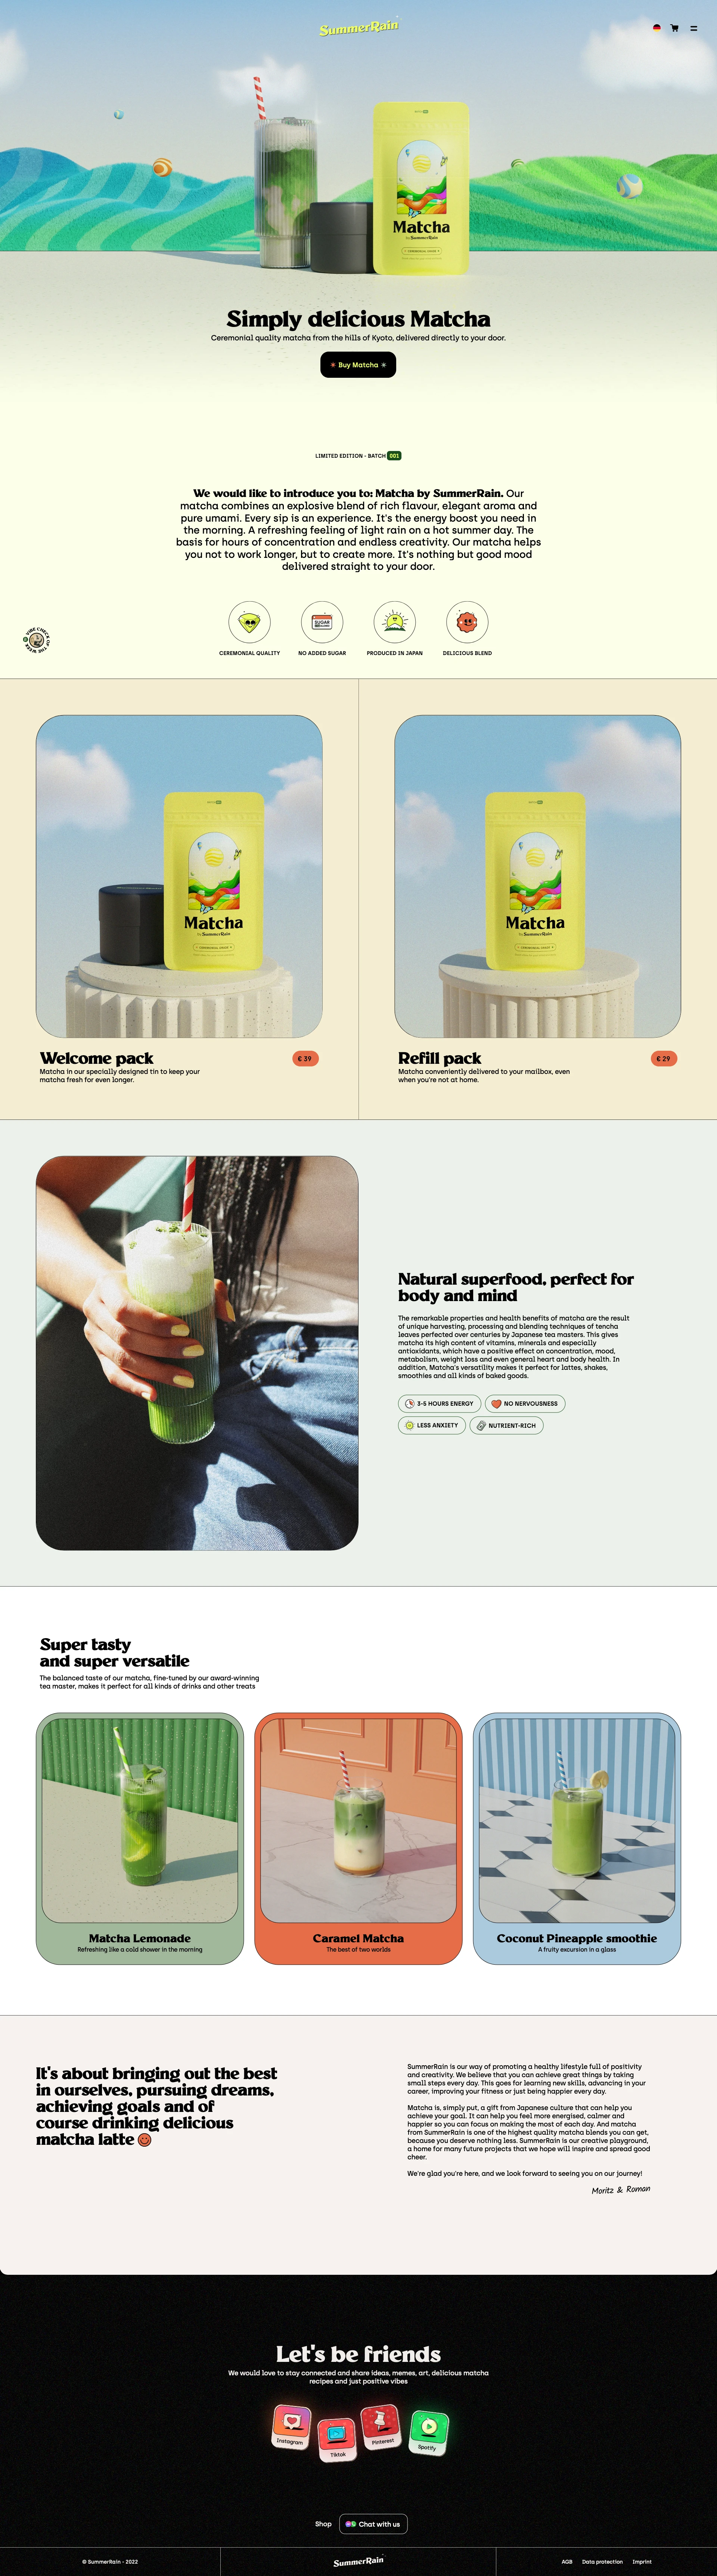 SummerRain Landing Page Example: Simply delicious Matcha. Ceremonial quality matcha from the hills of Kyoto, delivered directly to your door.